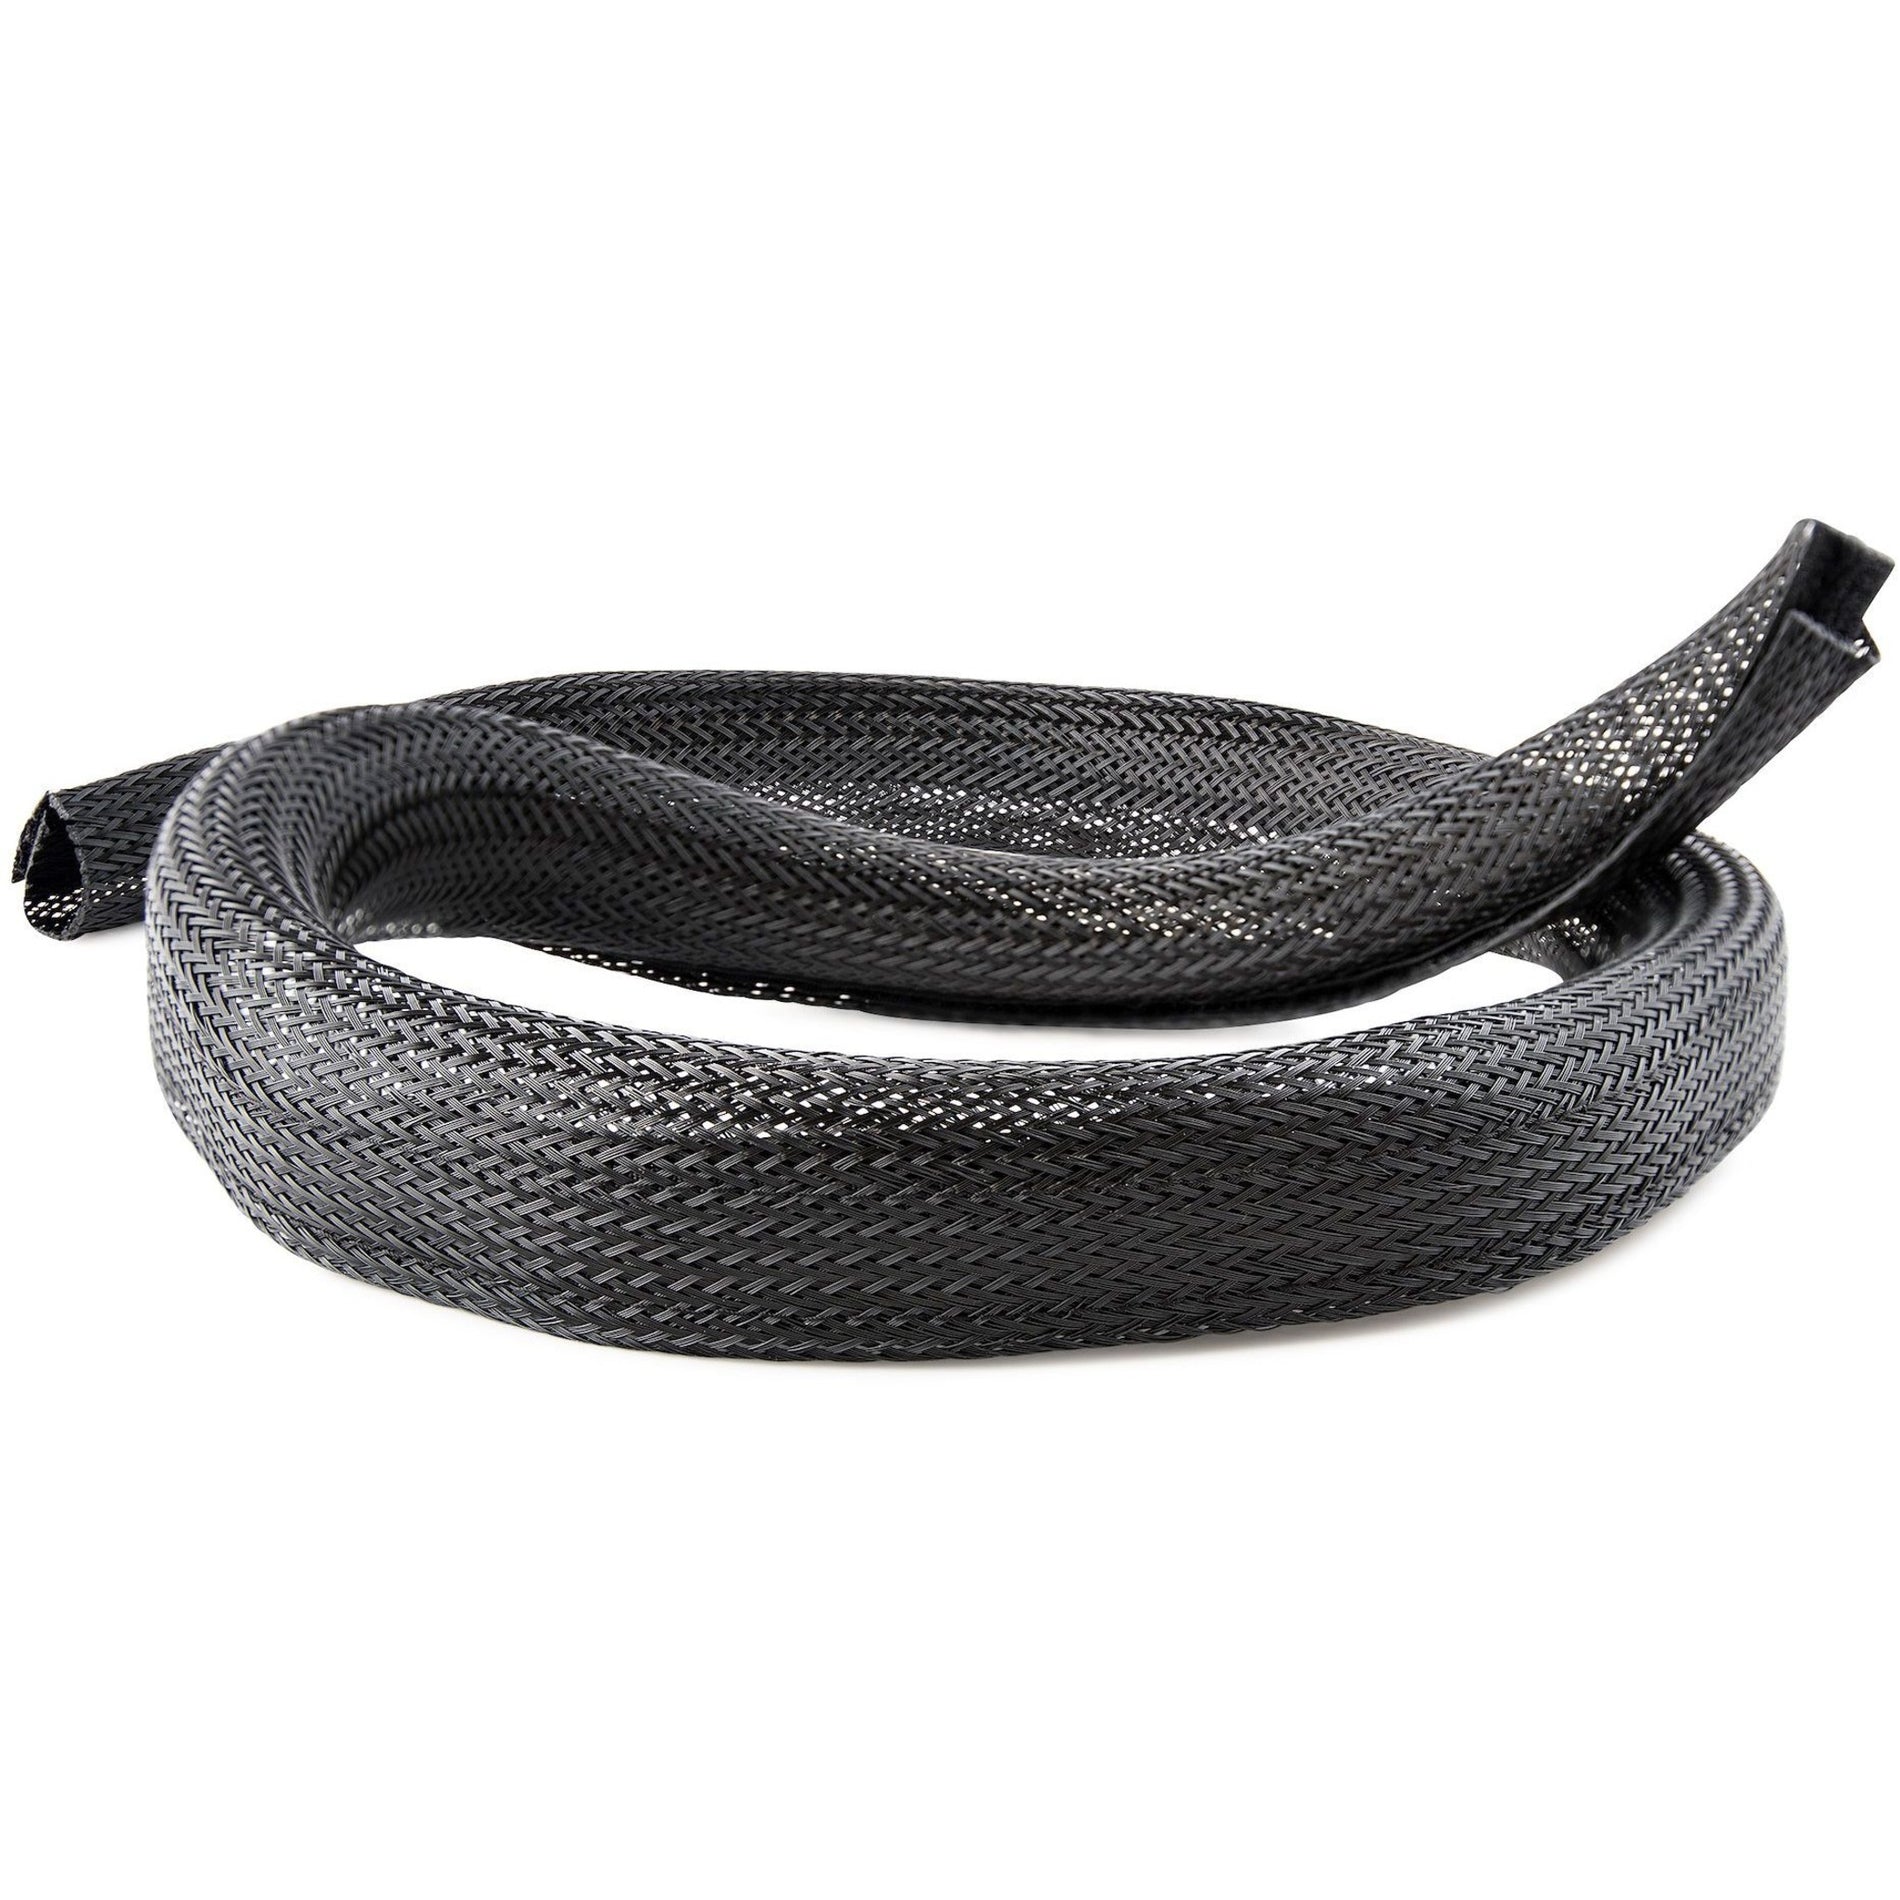 StarTech.com WKSTNCMFLX 10ft Cable Management Sleeve, Braided Mesh Wire Wraps